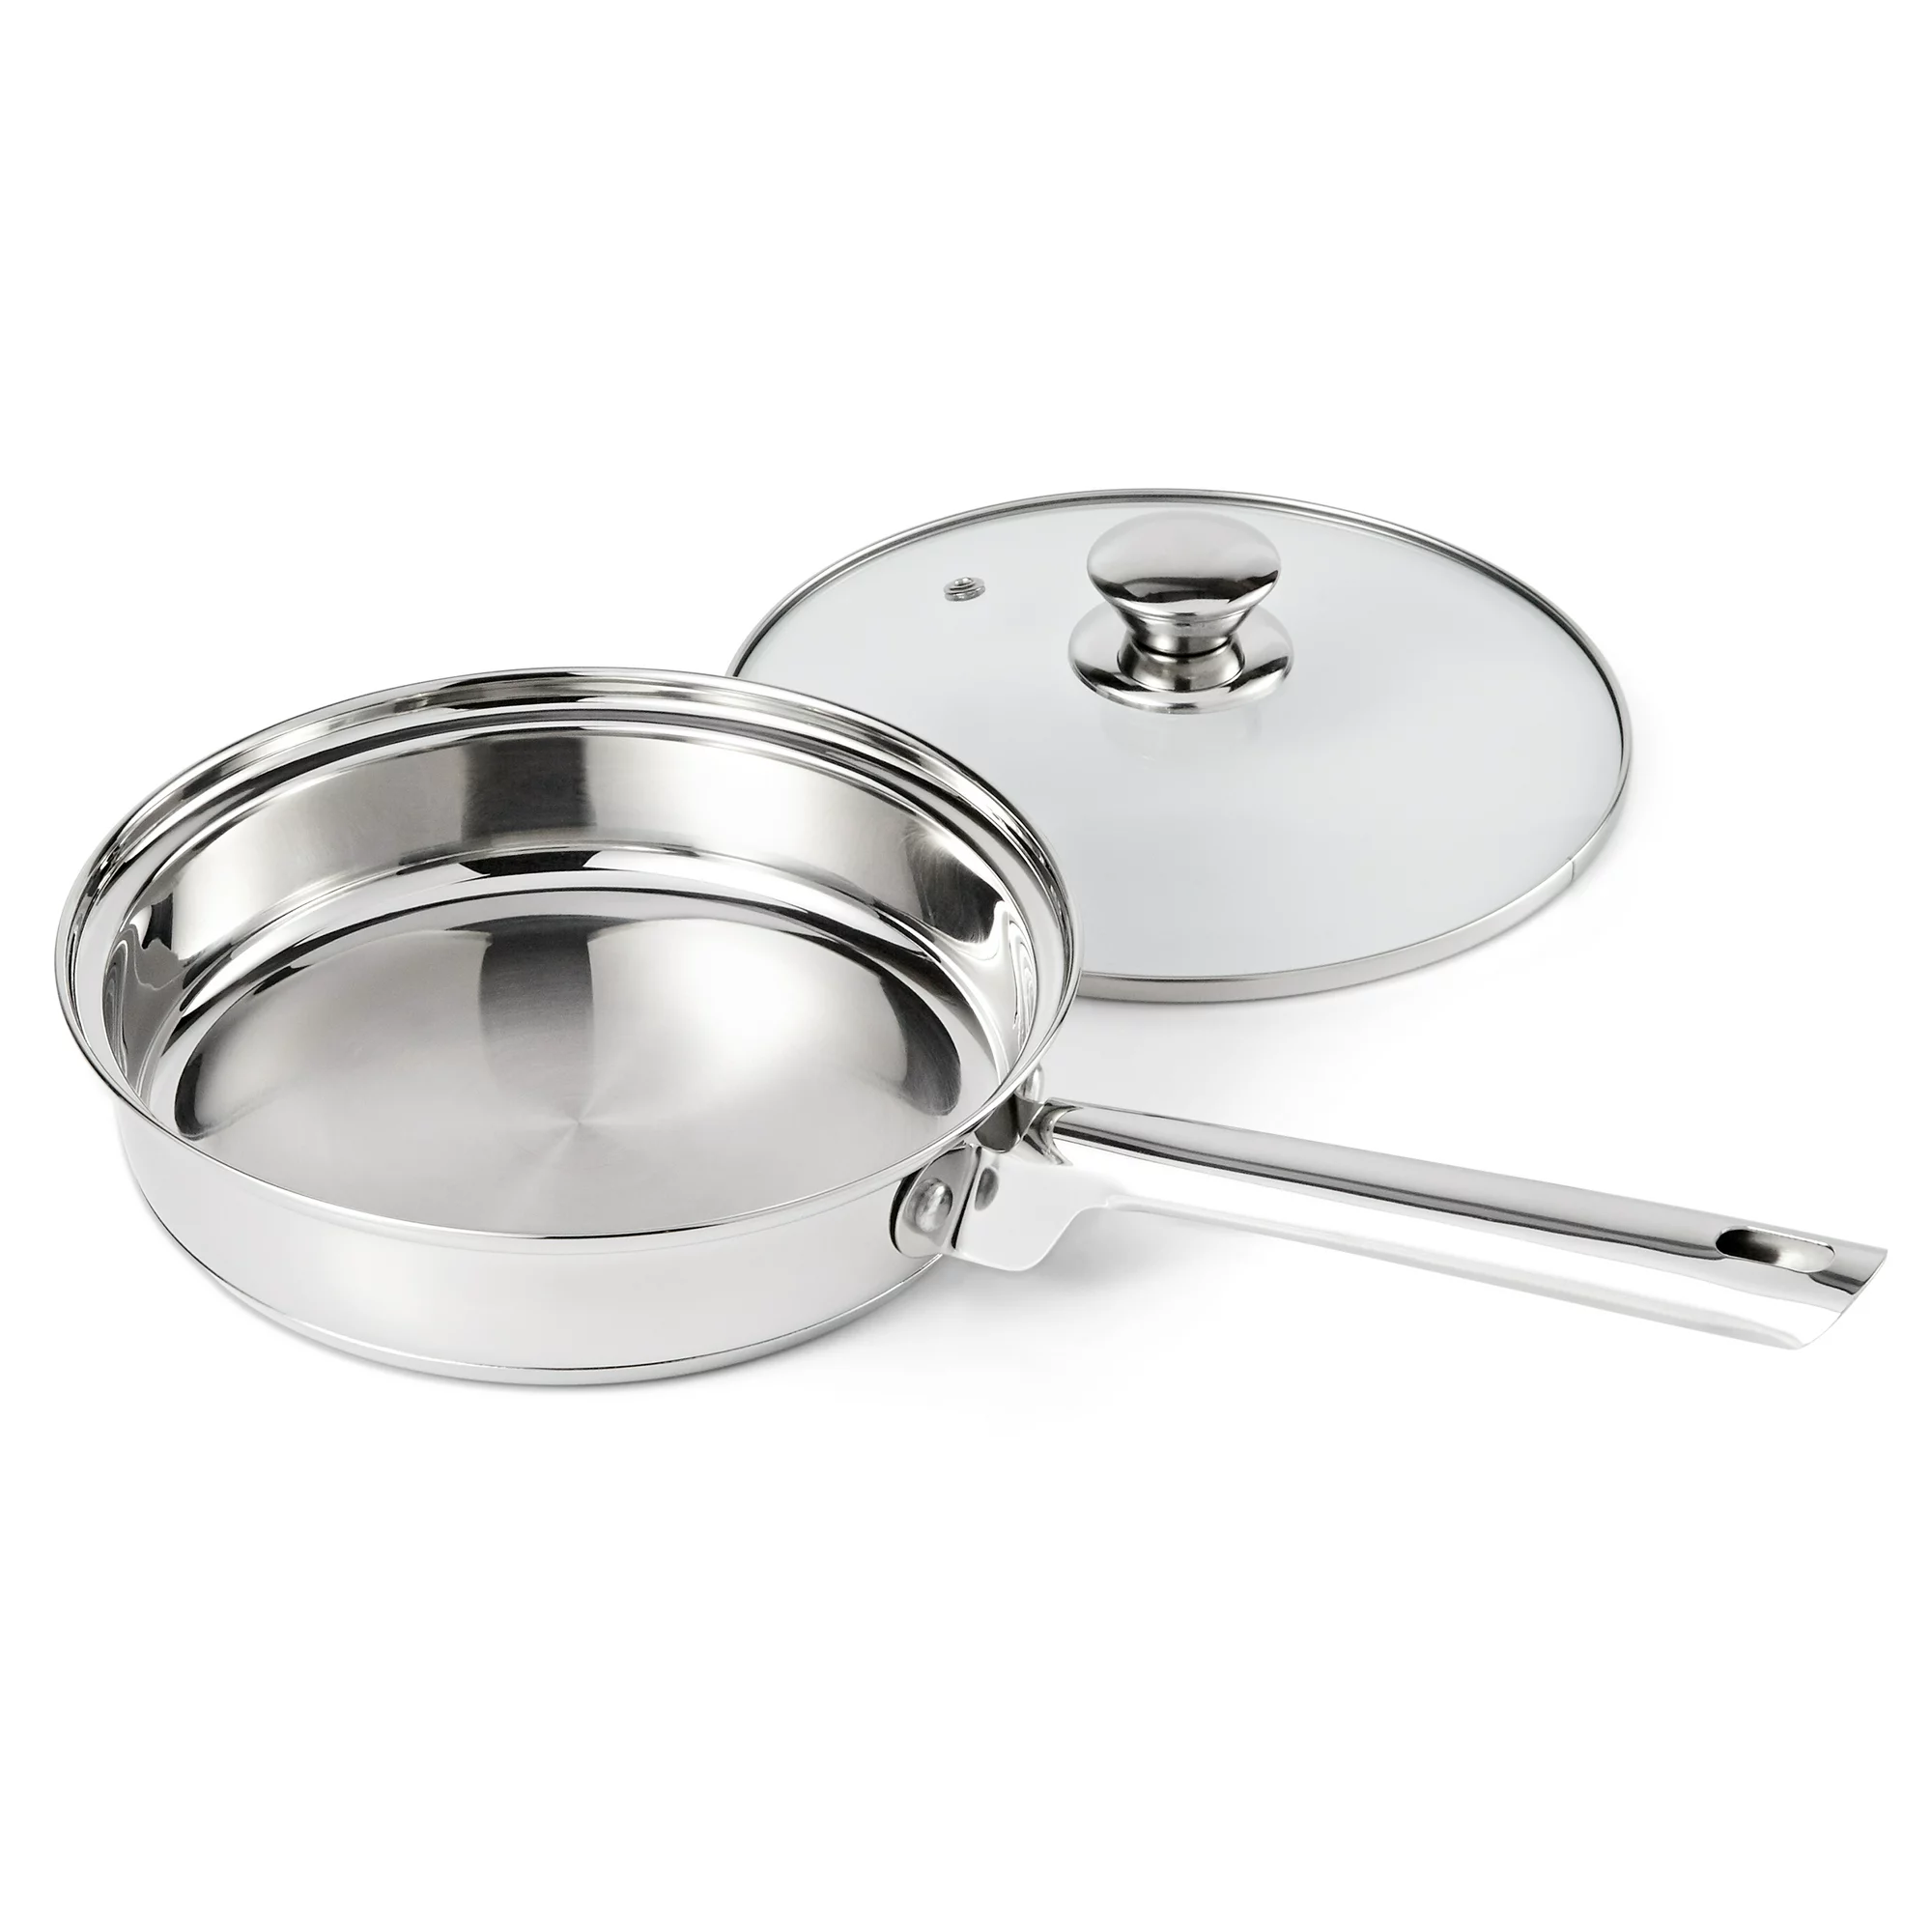 https://discounttoday.net/wp-content/uploads/2022/10/Mainstays-ECB52SE-Stainless-Steel-Cookware-and-Kitchen-Combo-Set9.webp